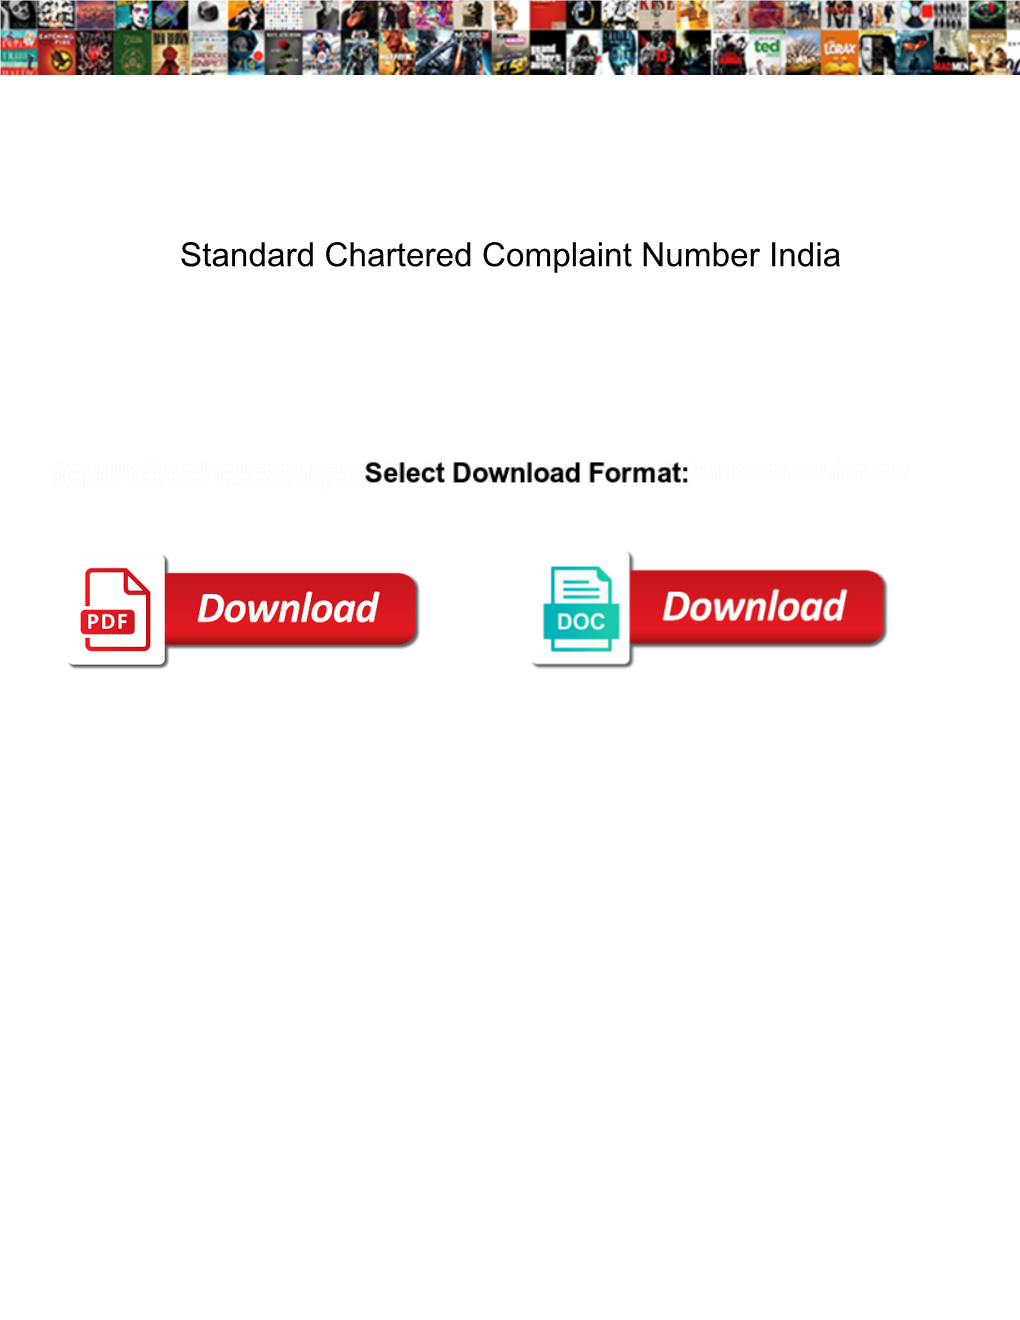 Standard Chartered Complaint Number India